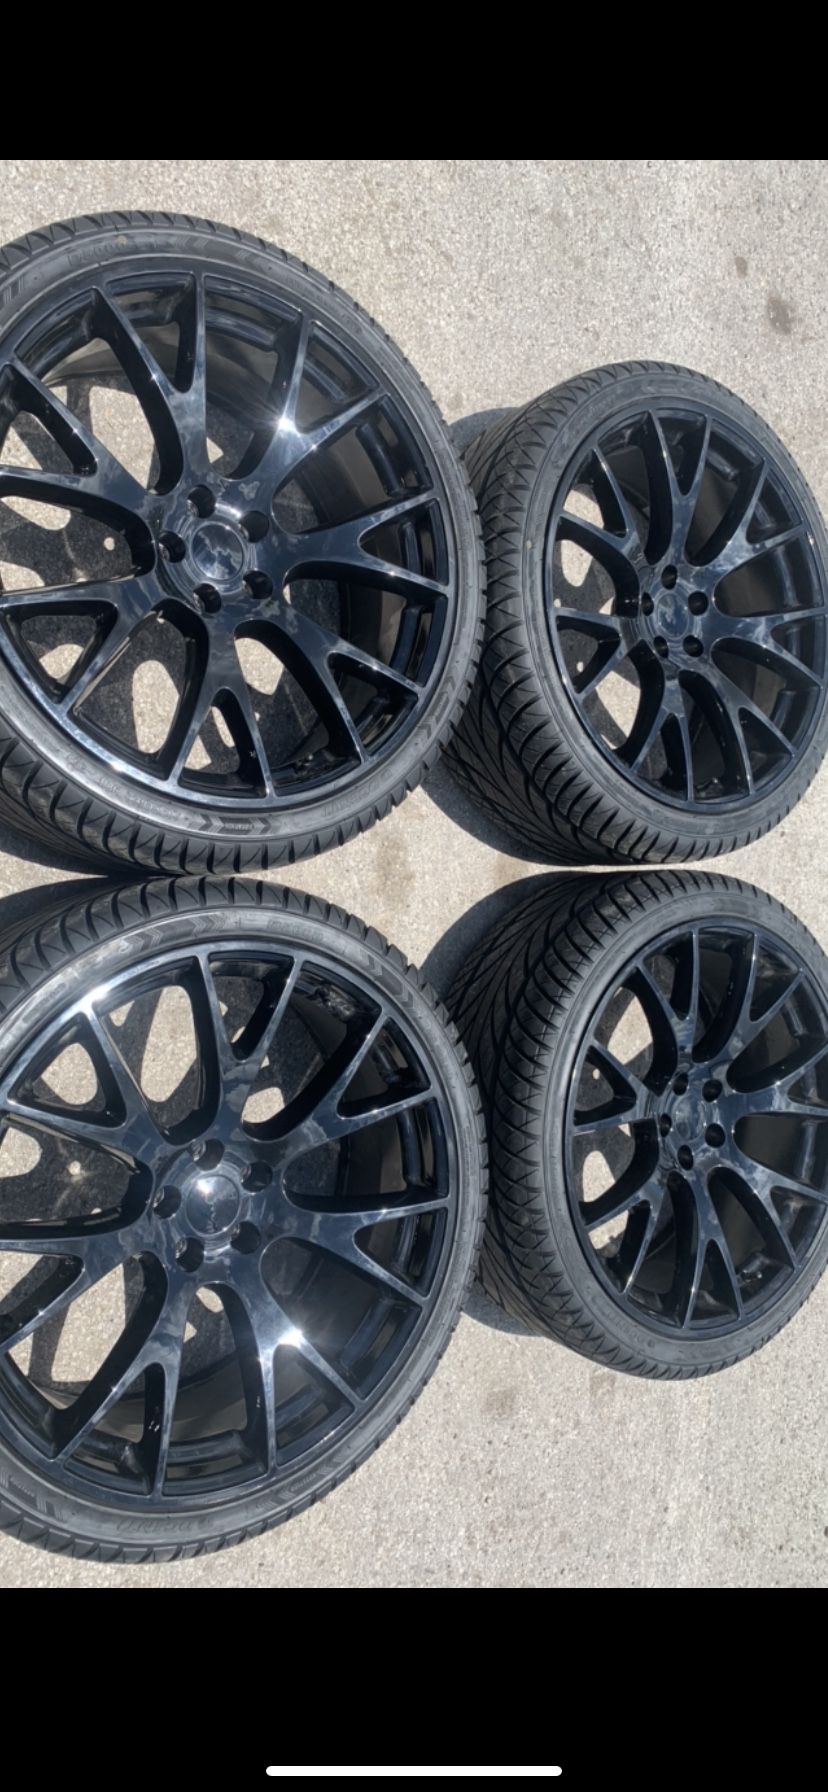 New 22” Black hellcat Rims and New Tires 22 Hell cat Replica Wheels 22s Dodger Charger Challenger Chrysler 300 Rines y Llantas Oem factory’s factory